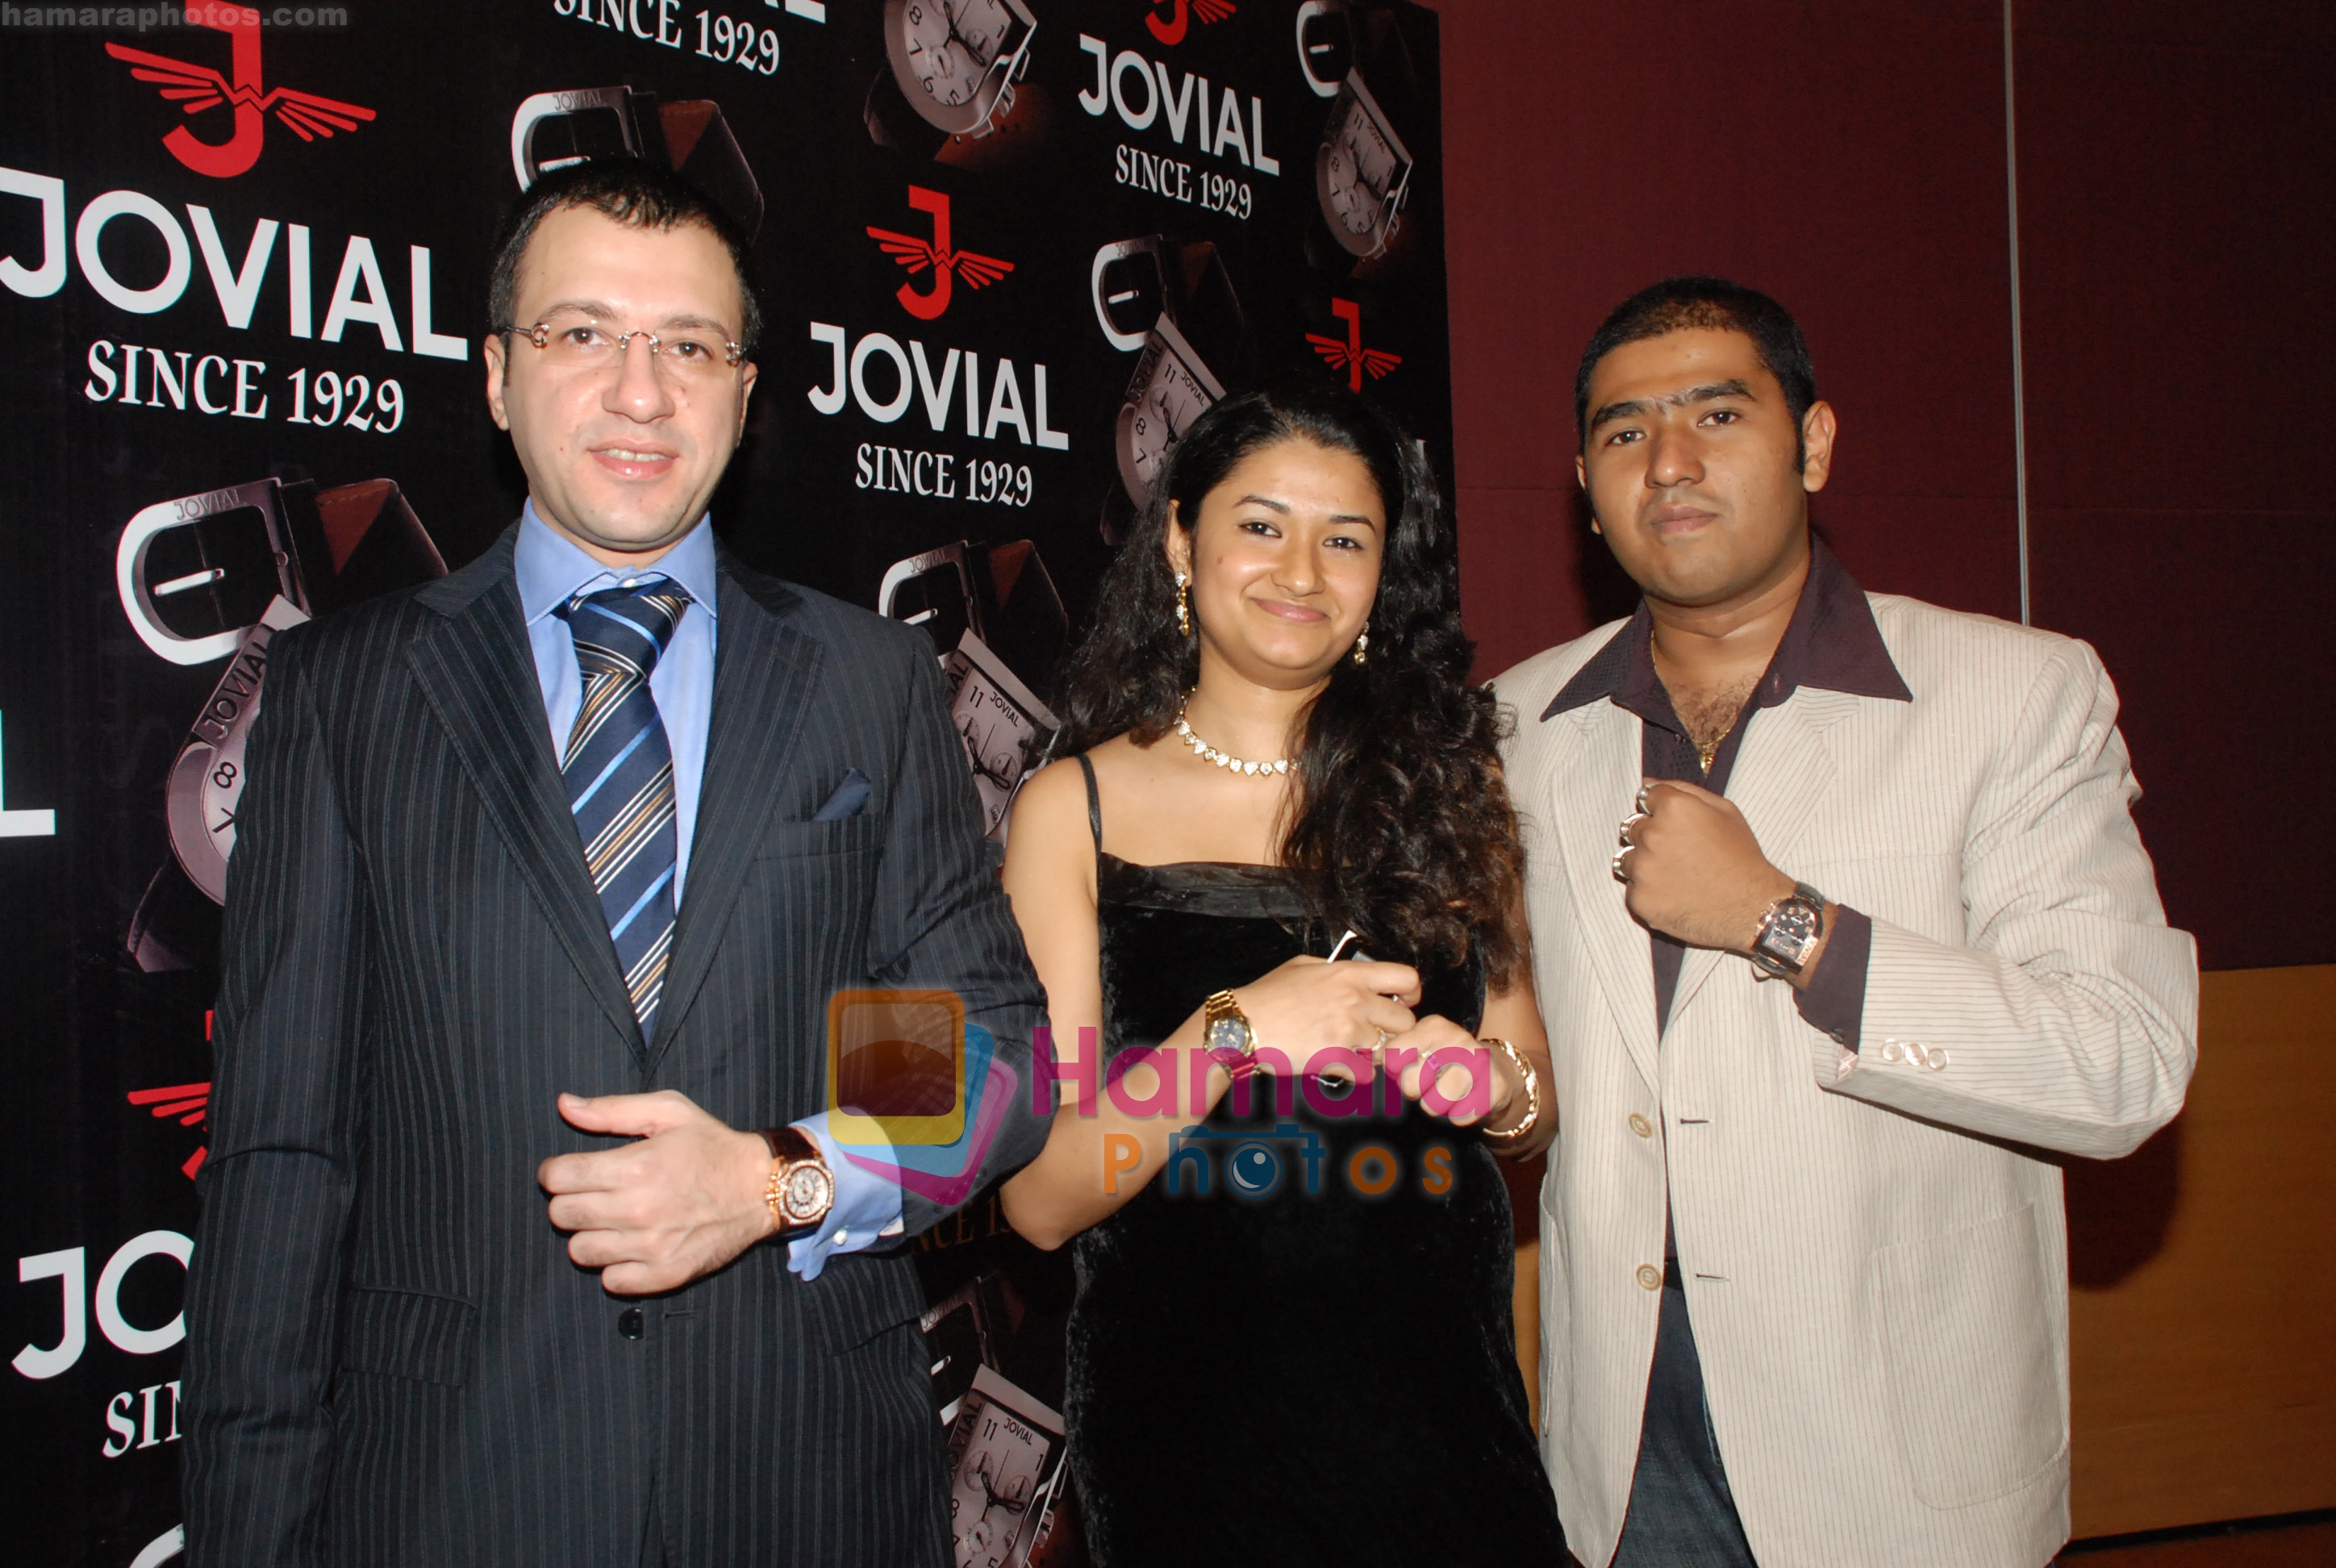 at the Launch of Jovial by Lonsia Fashions Pvt Ltd in Grand Hyatt on 17th October 2008 